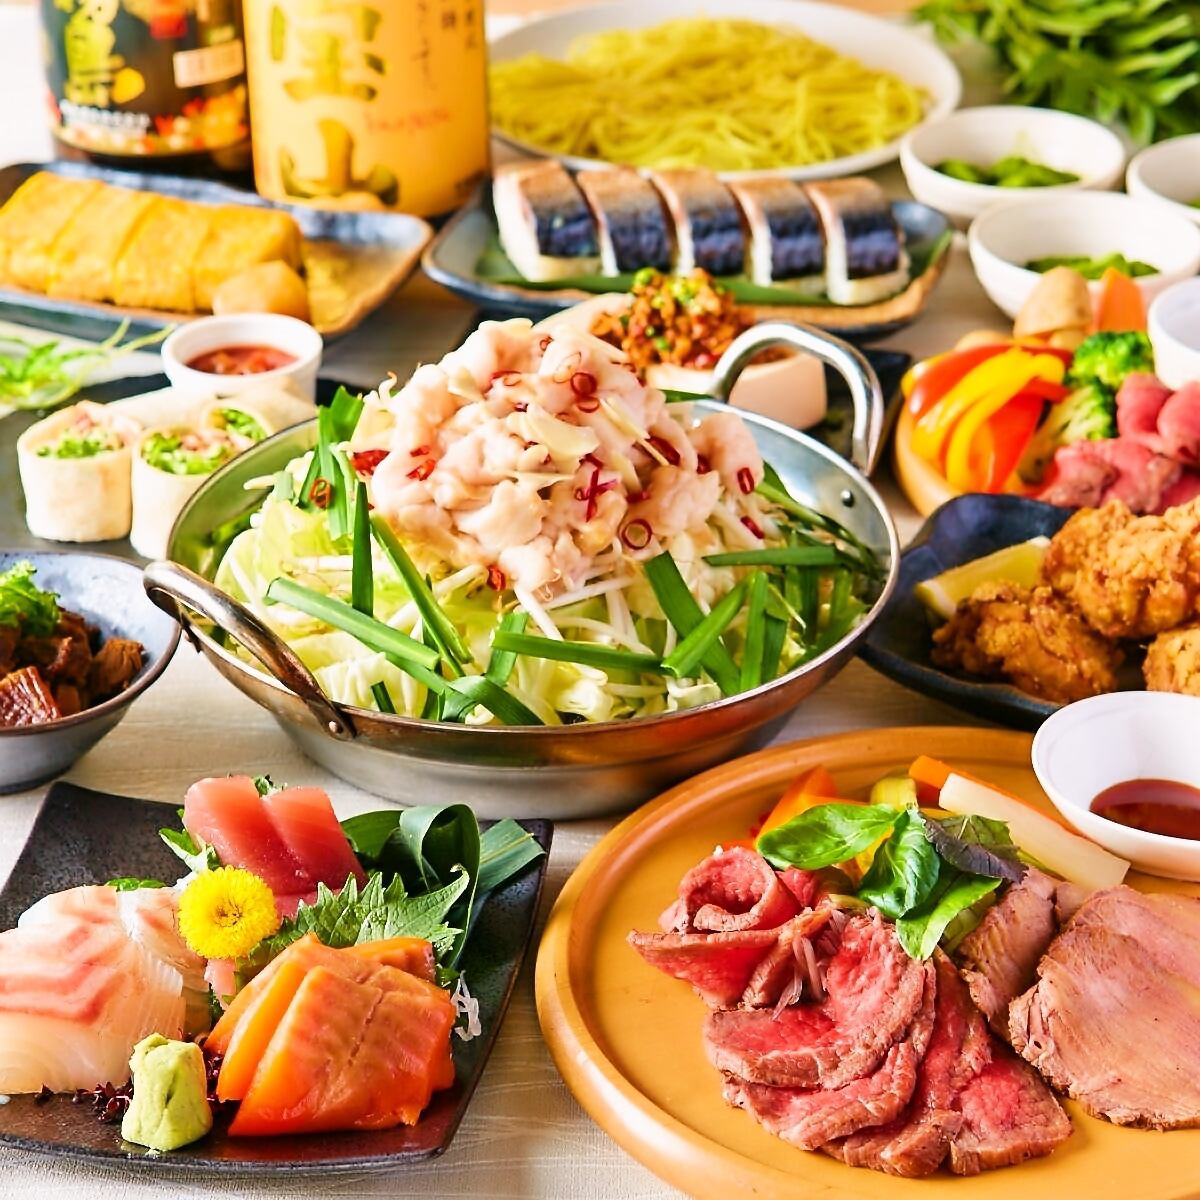 There is also a full course with all-you-can-drink! We offer 6 dishes for 2,980 yen to 12 dishes for 4,980 yen!